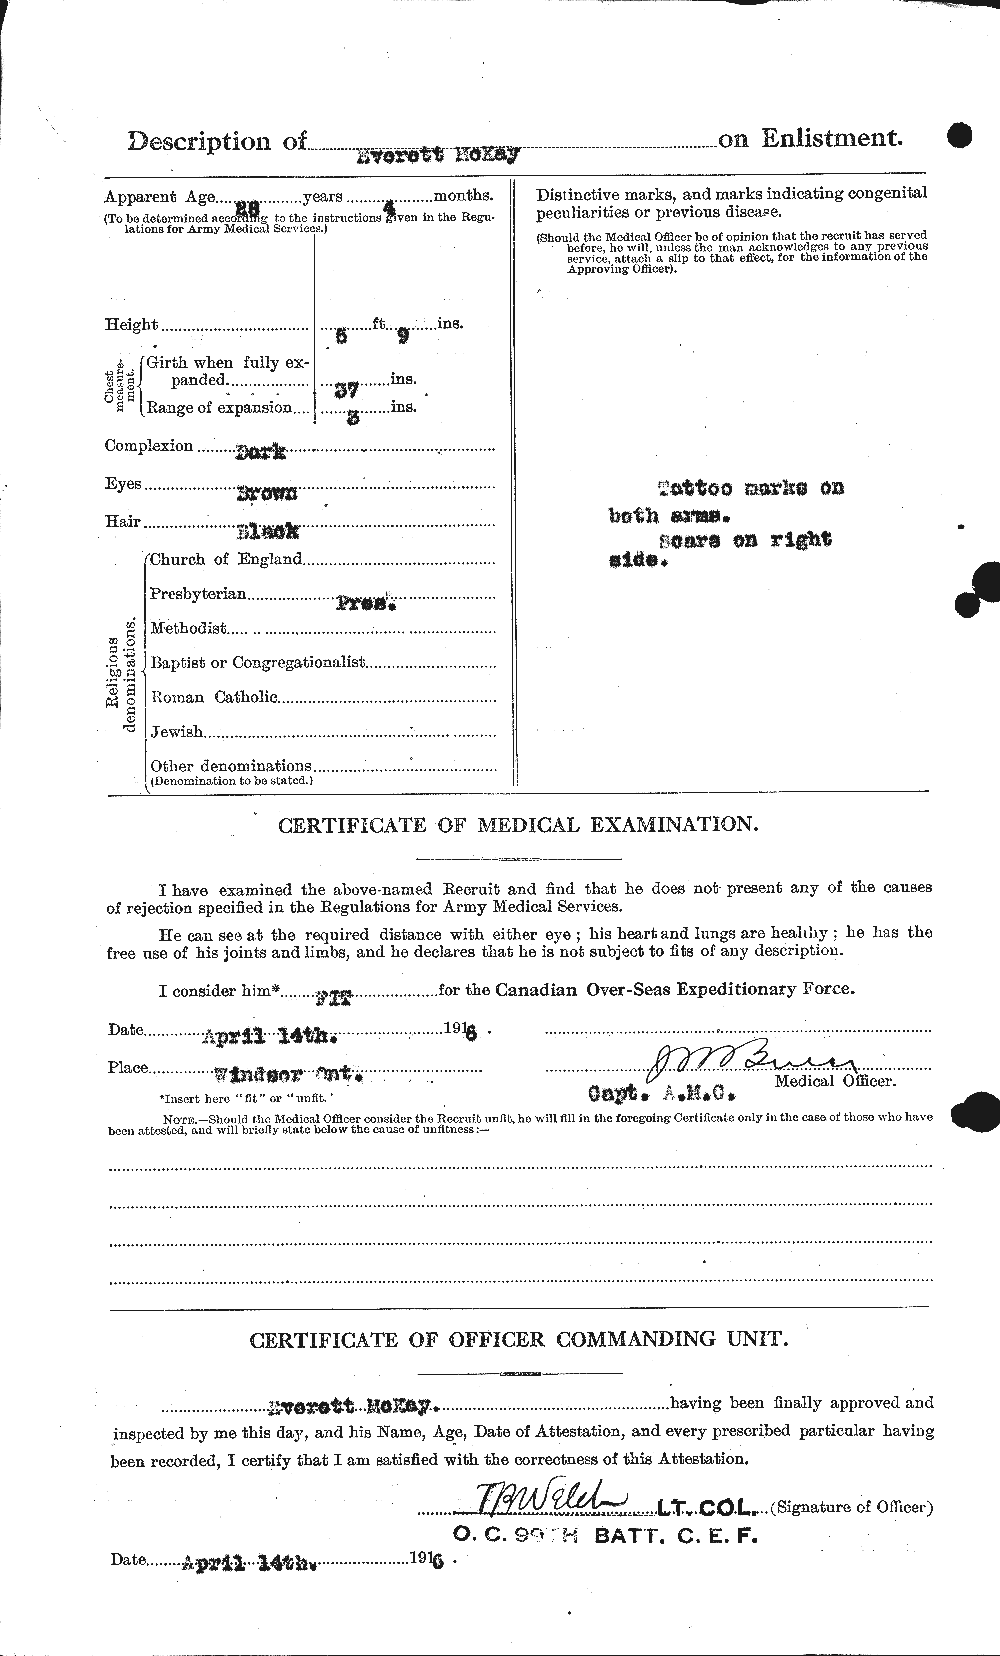 Personnel Records of the First World War - CEF 534598b